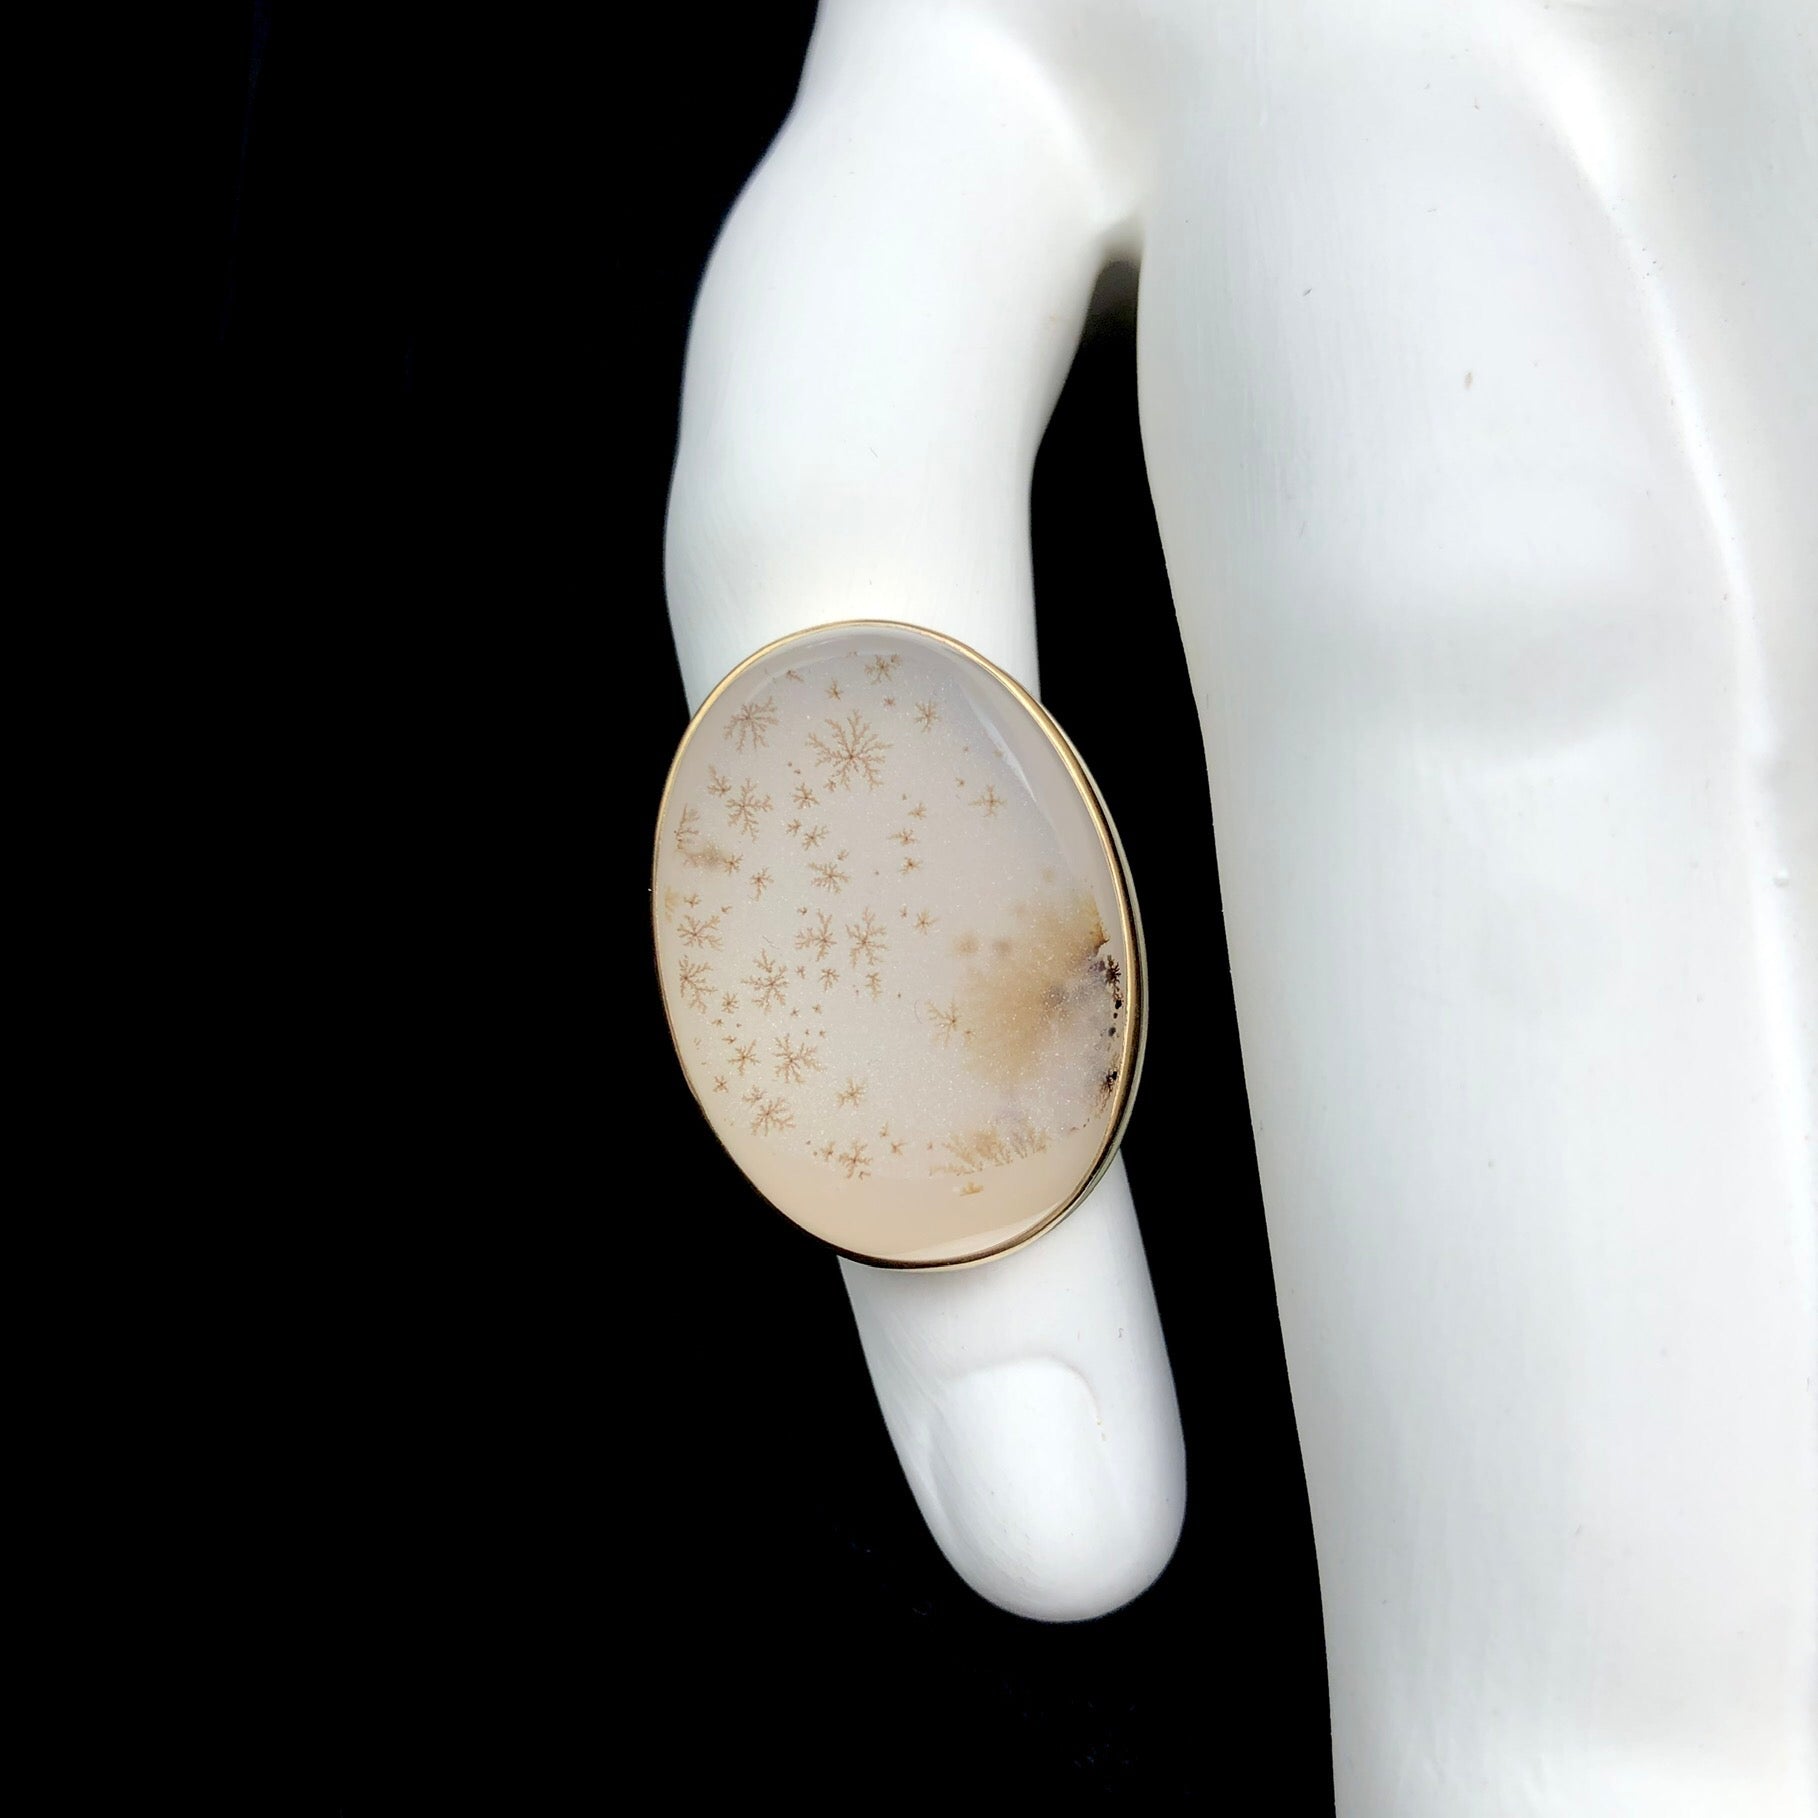 Brown dendritic accents on white crystalline druzy surface agate ring shown on white ceramic finger